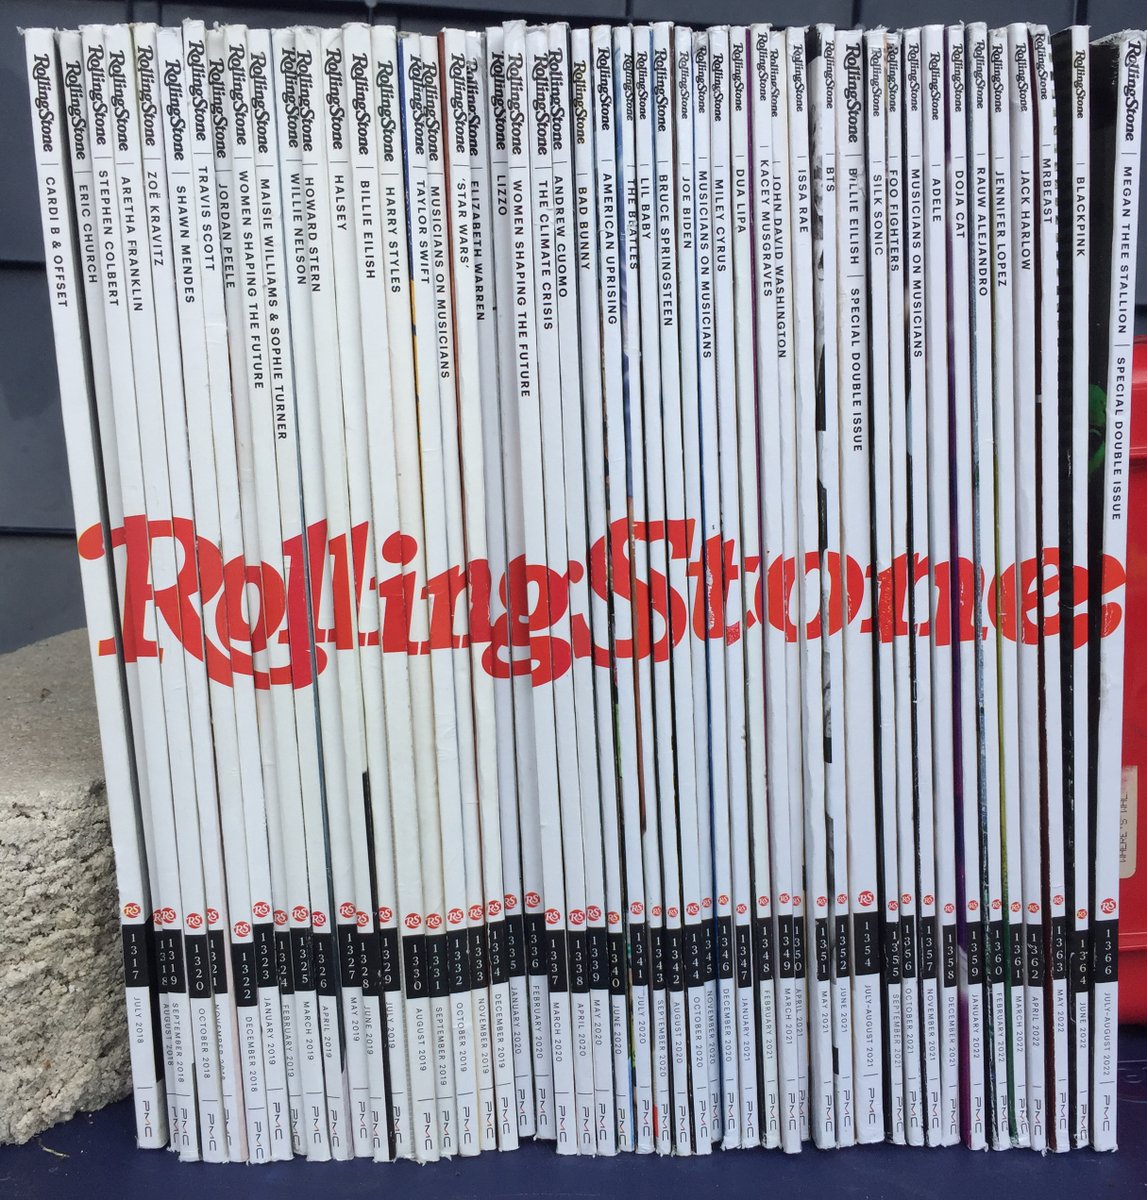 Exactly 4 years ago, @RollingStone magazine began a new monthly, perfect bound format, with each issue containing a sliver of the RS logo on the spine. This month's issue culminates those 4 years! #Fulfilling 🤓